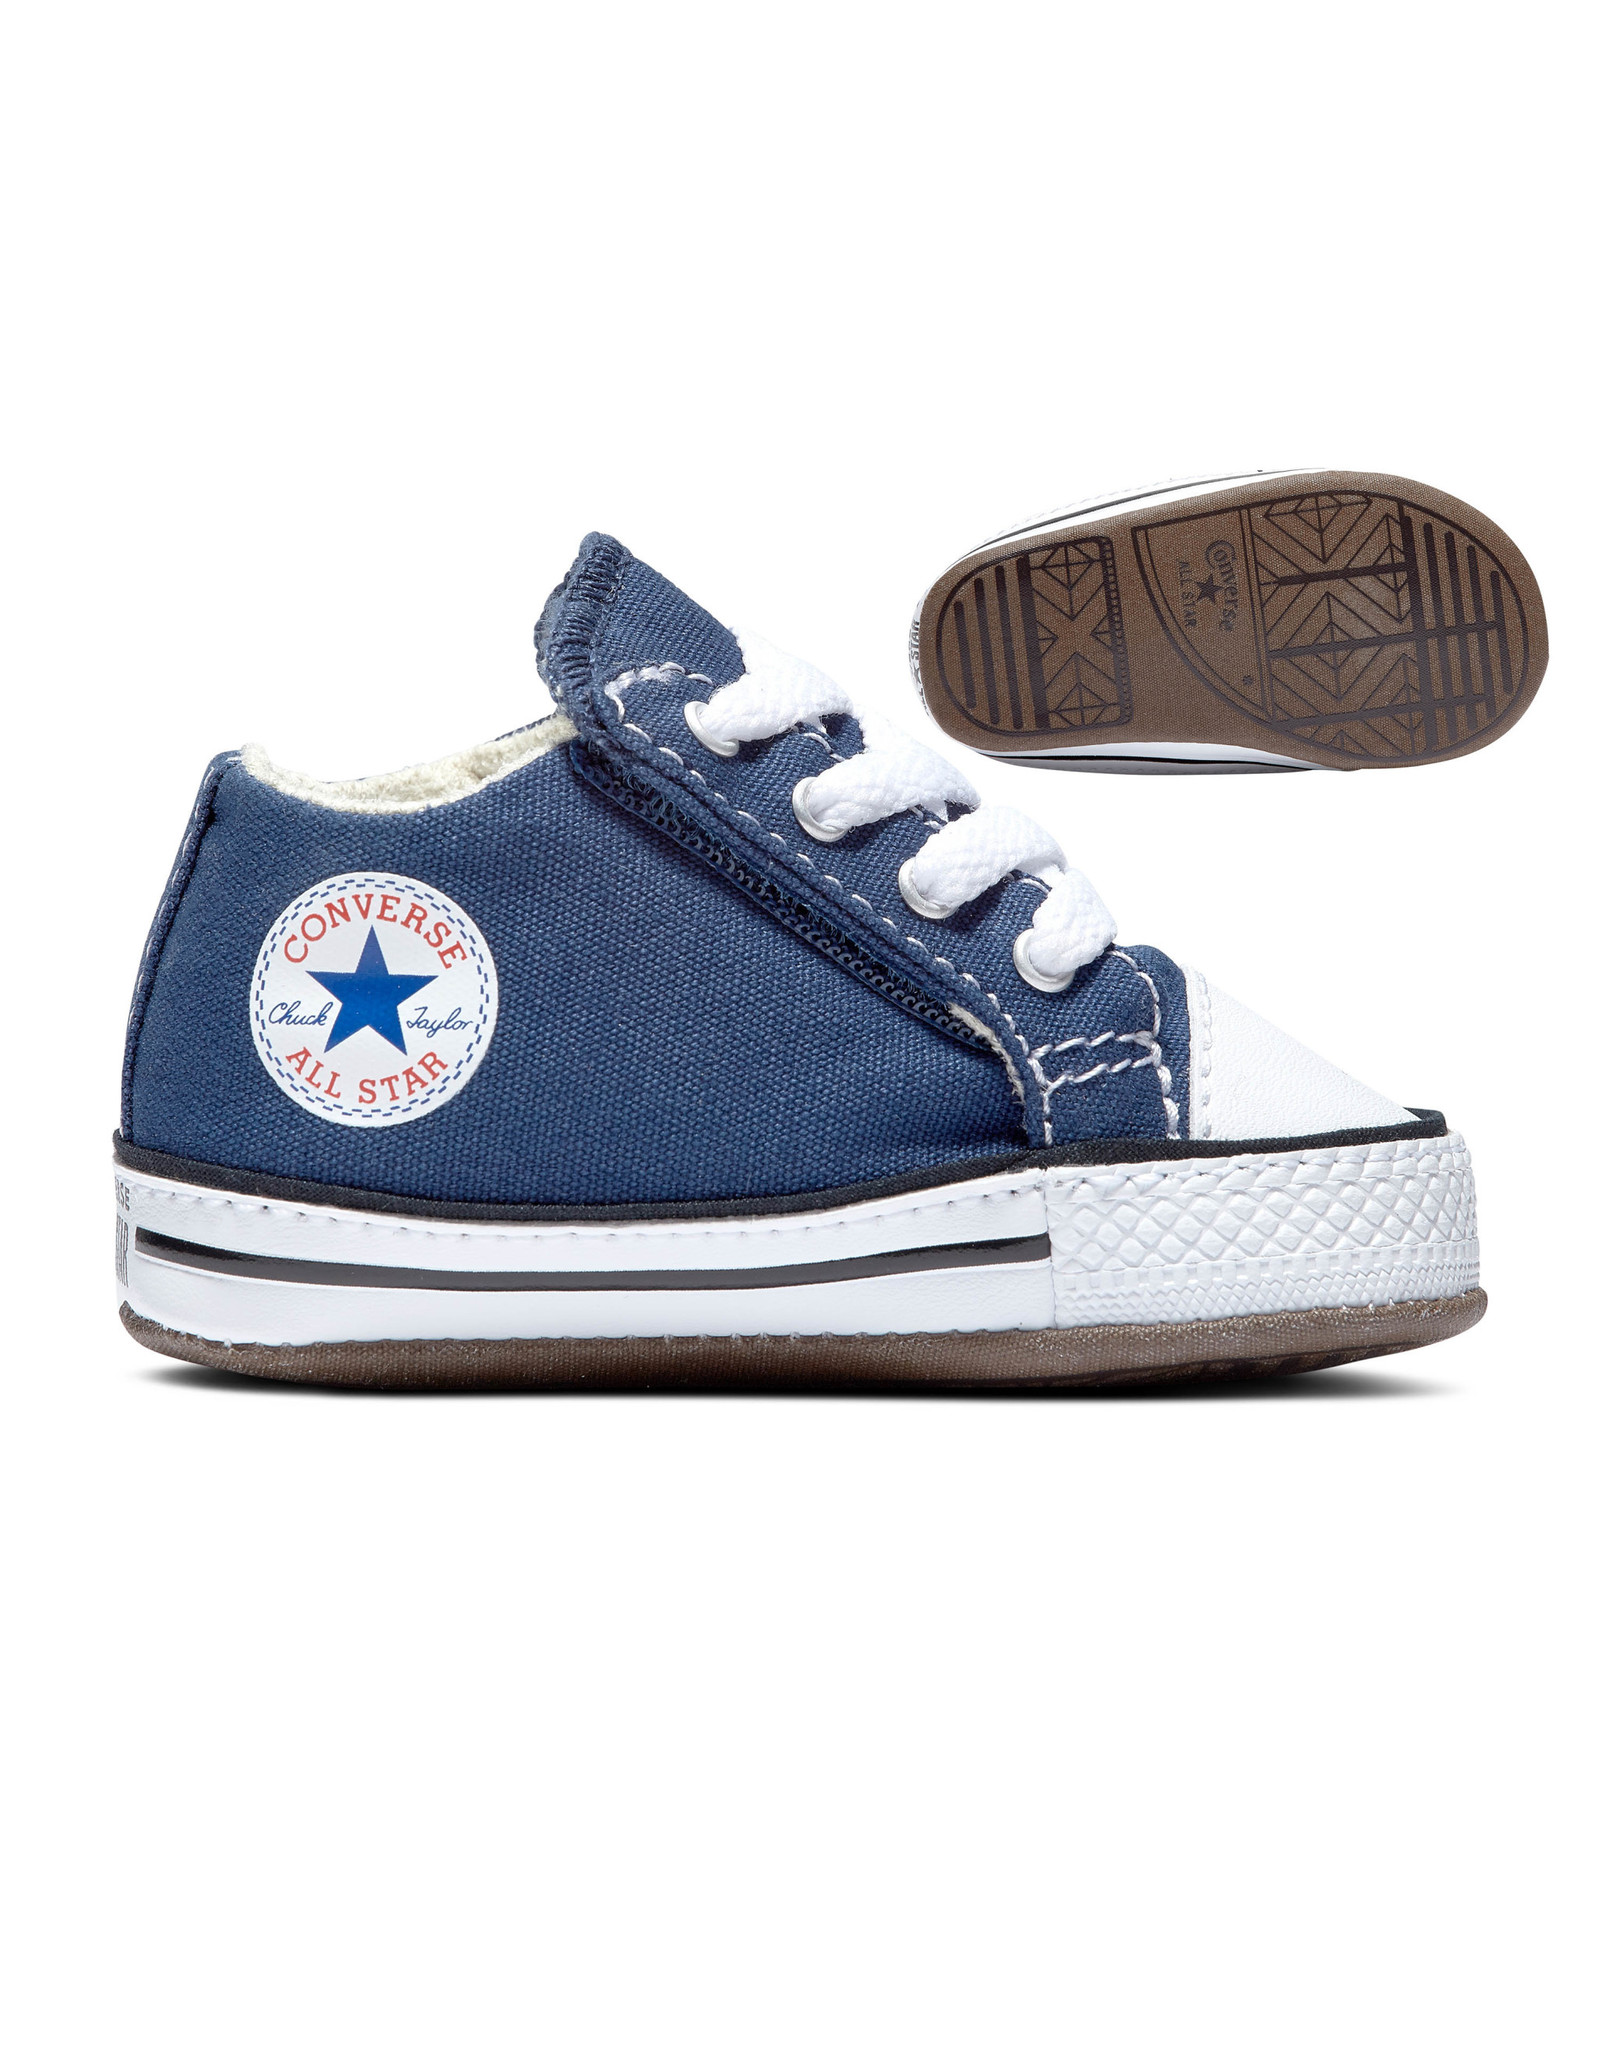 CONVERSE CHUCK TAYLOR ALL STAR CRIBSTER MID NAVY/NATURAL IVORY C12NN-865158C